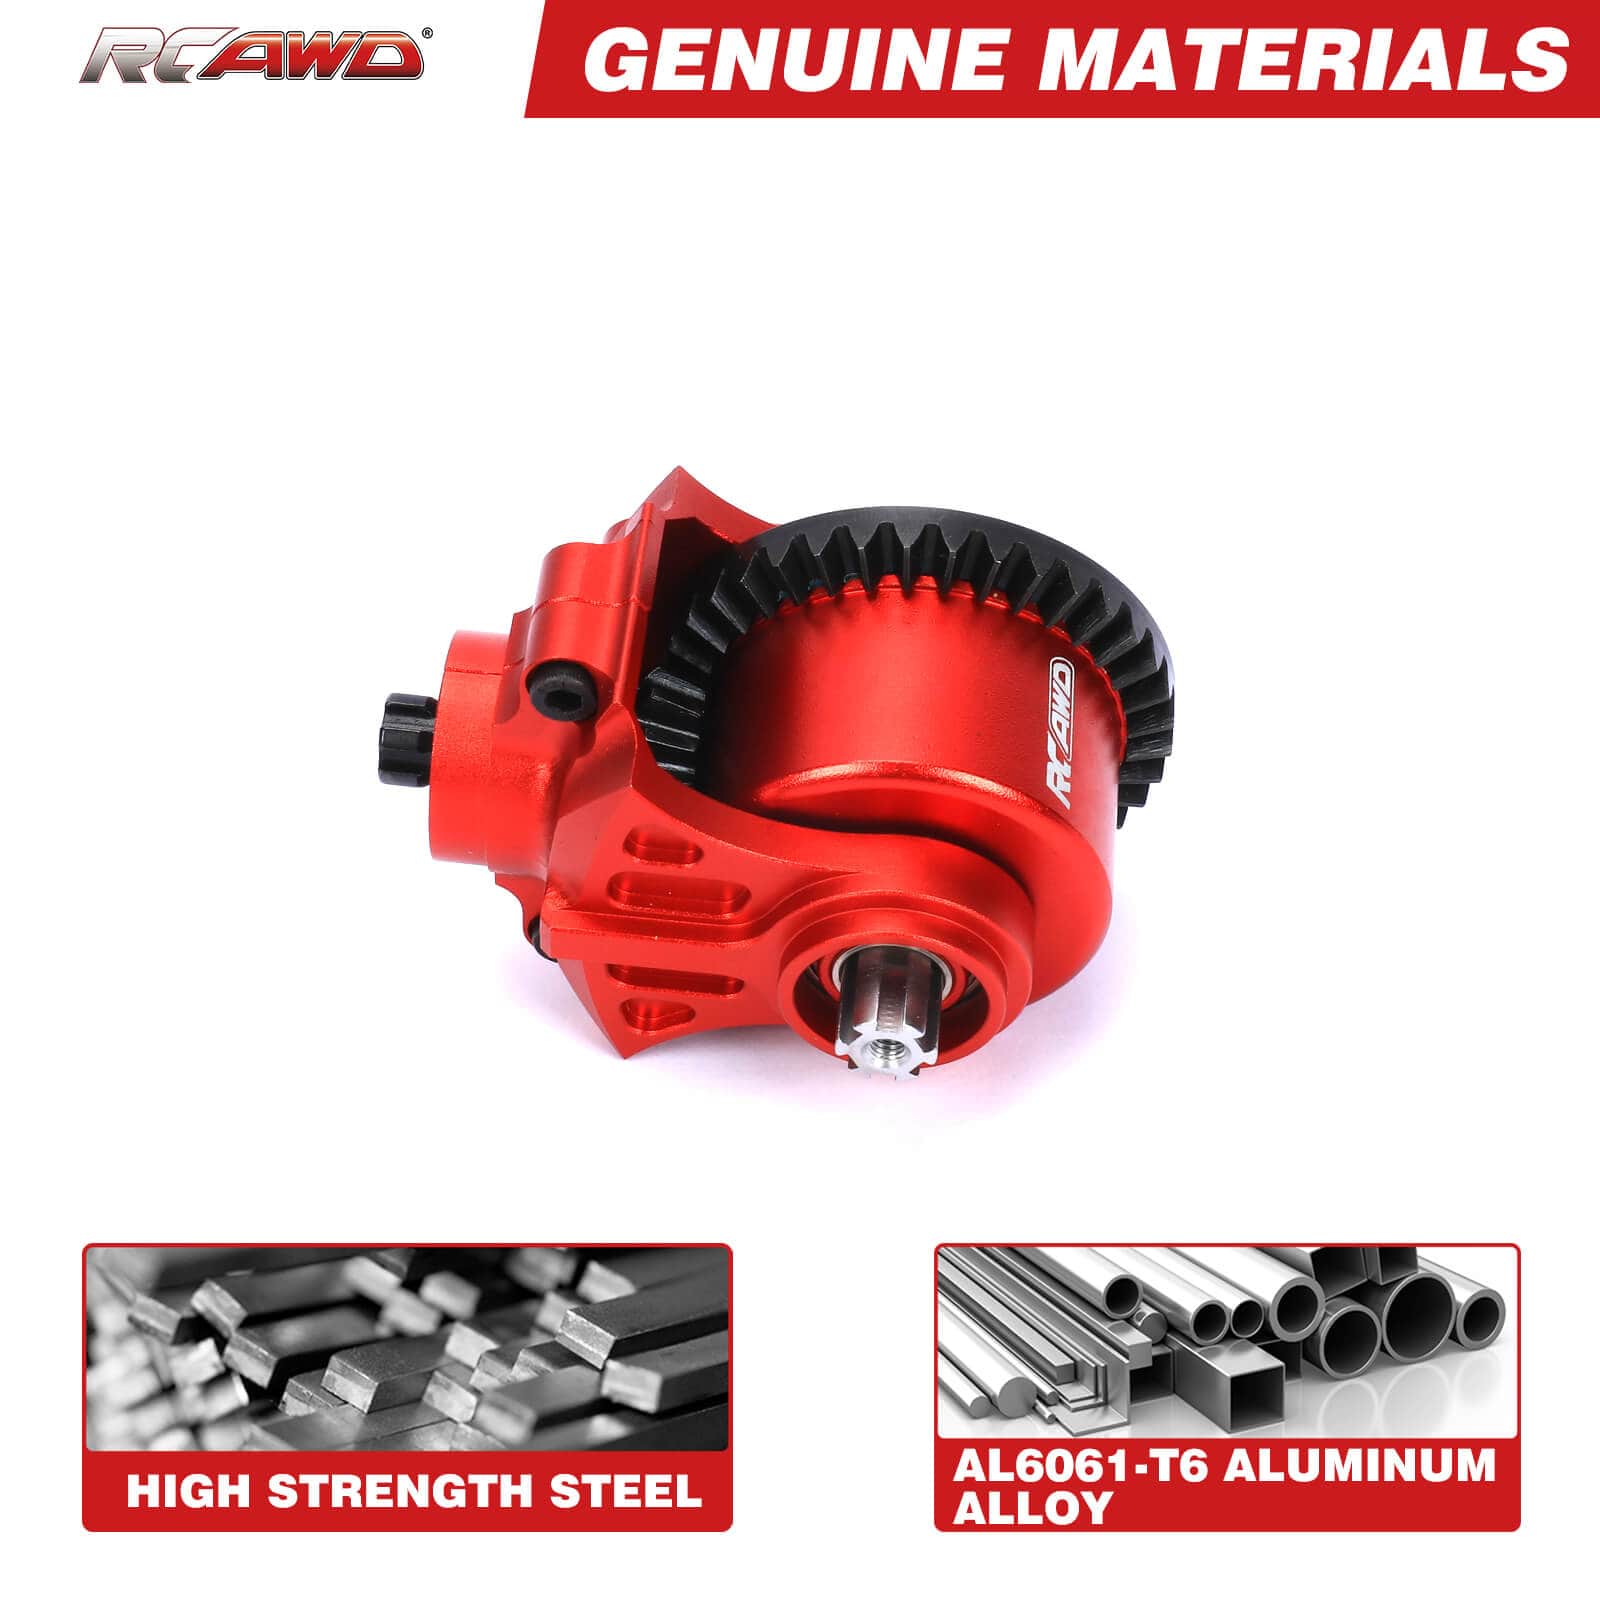 RCAWD ARRMA 3S RCAWD ARRMA 3s Upgrades 37T 13T Diff Set with Diff Case+Tilting Gears for RC Car